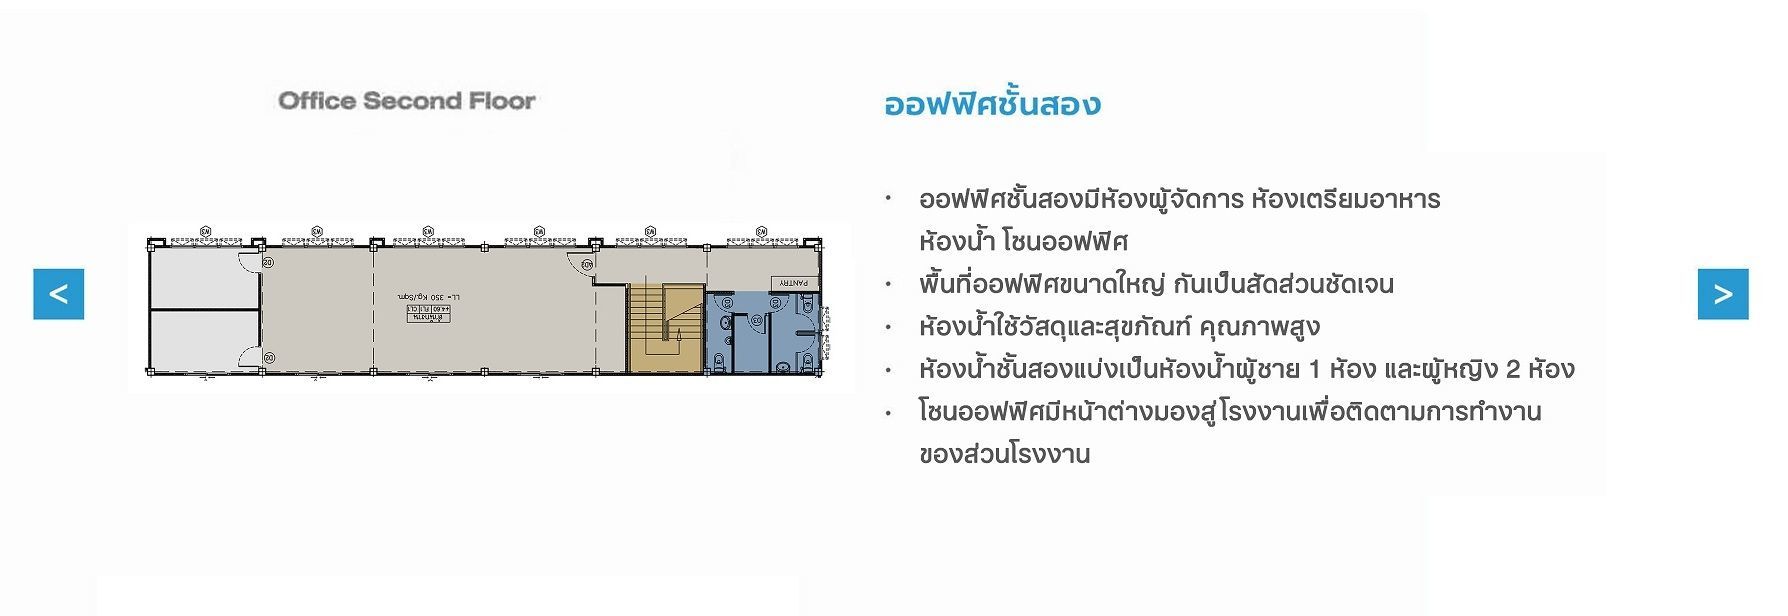 Pro Ind Factory for Rent Unit E Office 2 Layout Plan